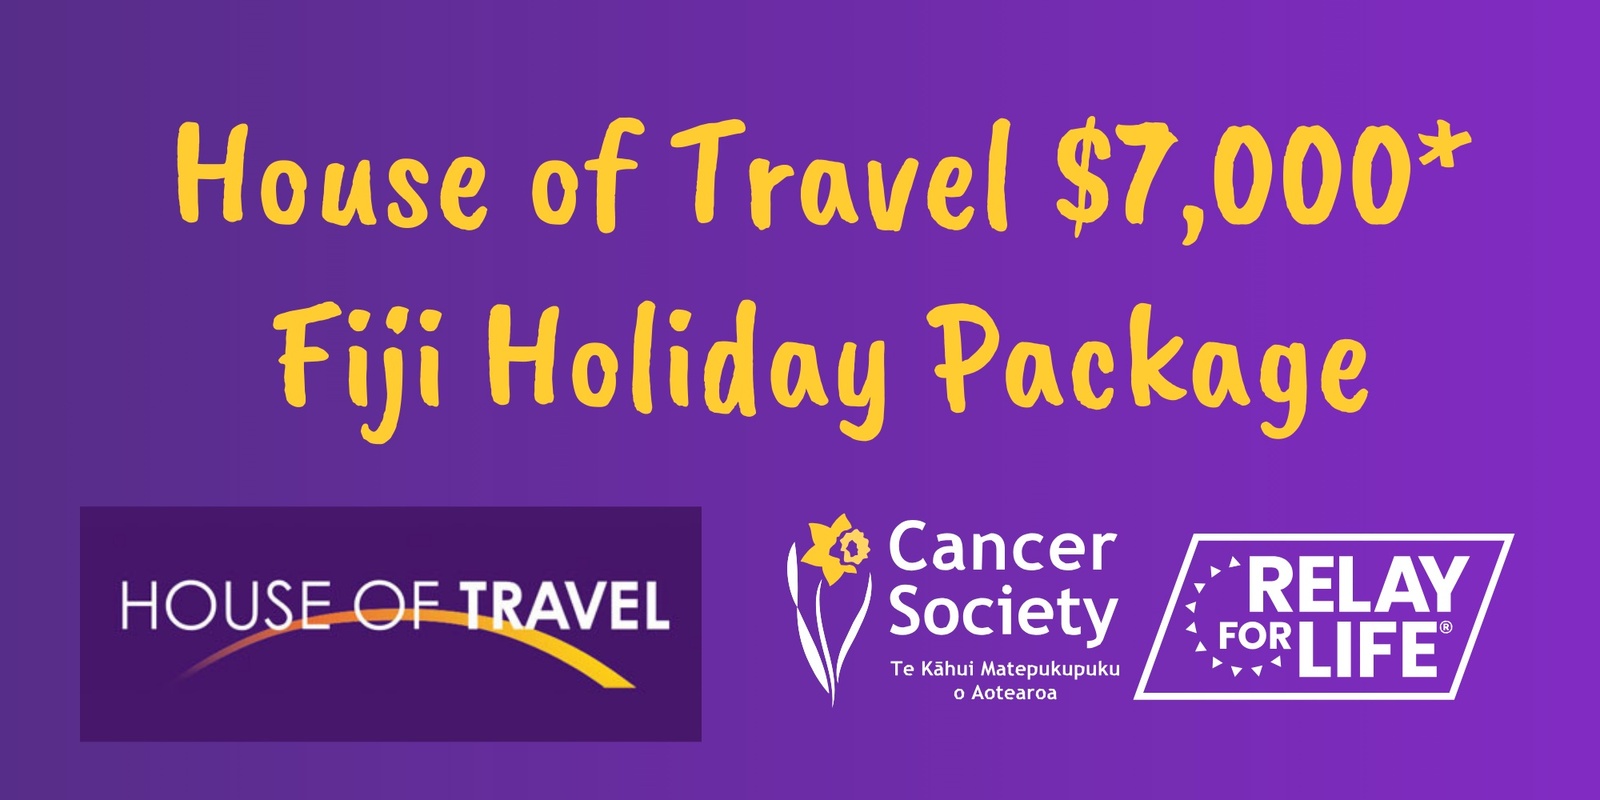 Banner image for House of Travel Fiji Holiday Raffle